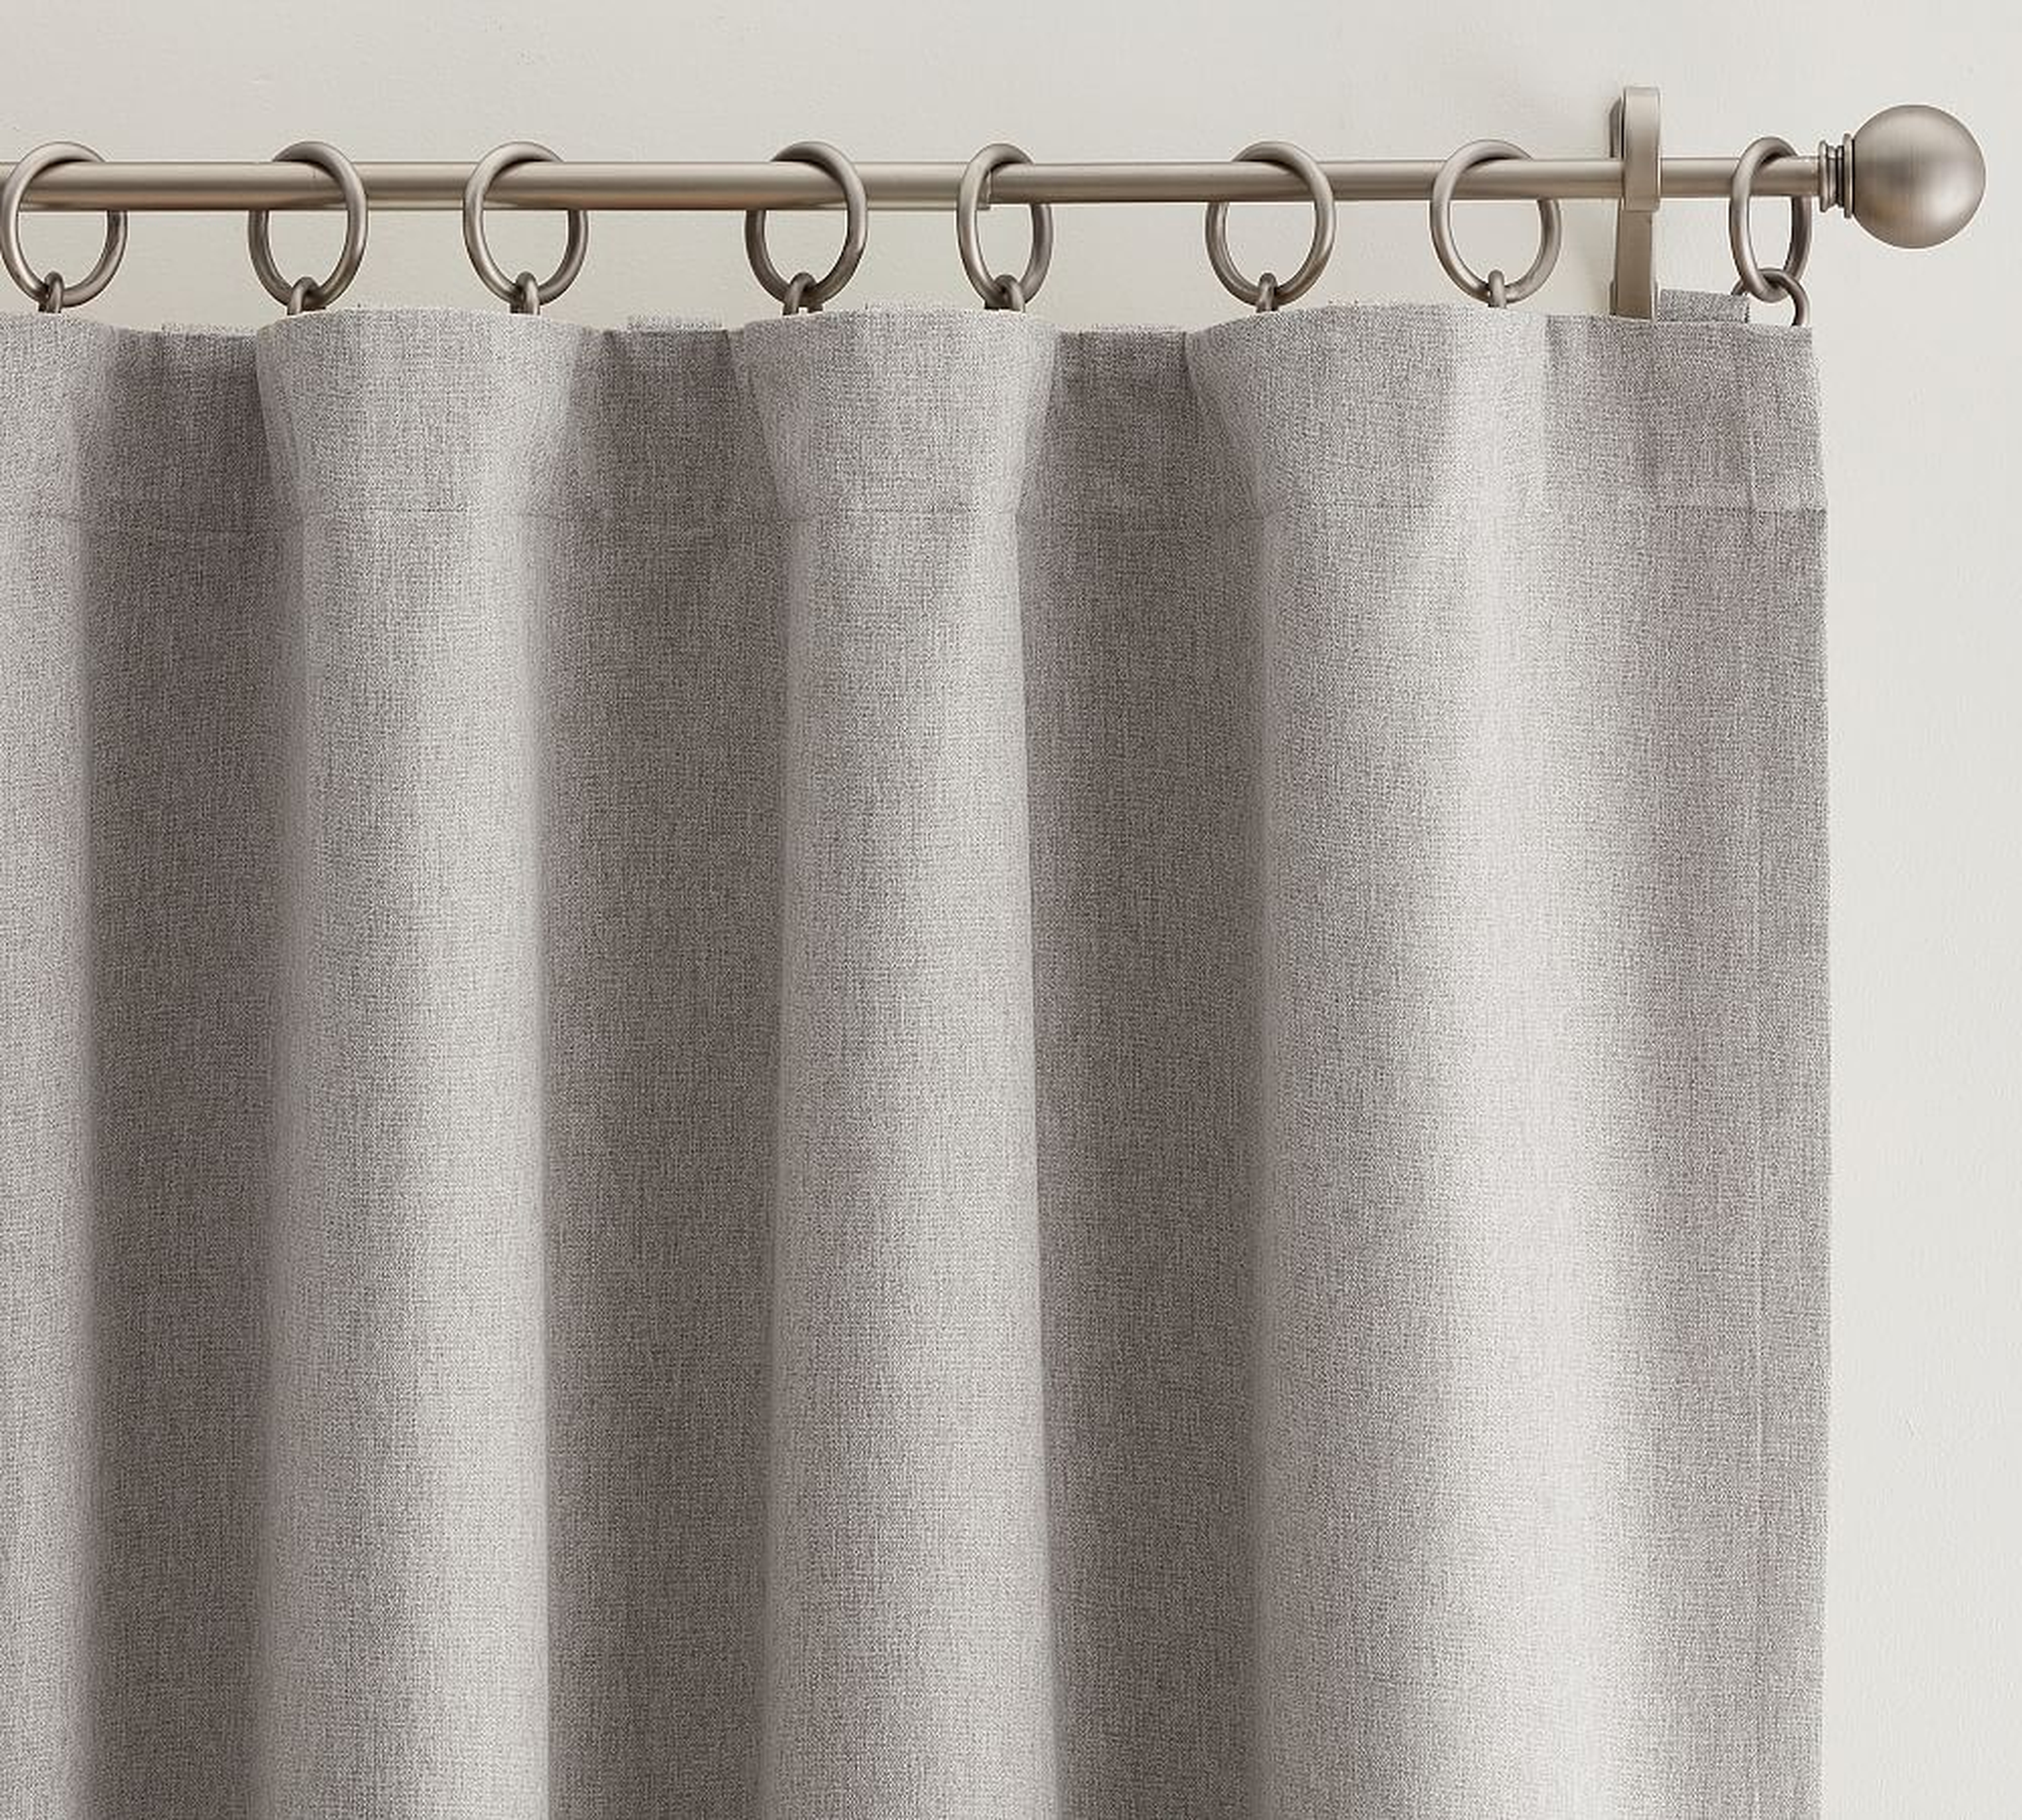 Peace & Quiet Noise-Reducing Blackout Curtain, 50 x 96", Gray - Pottery Barn